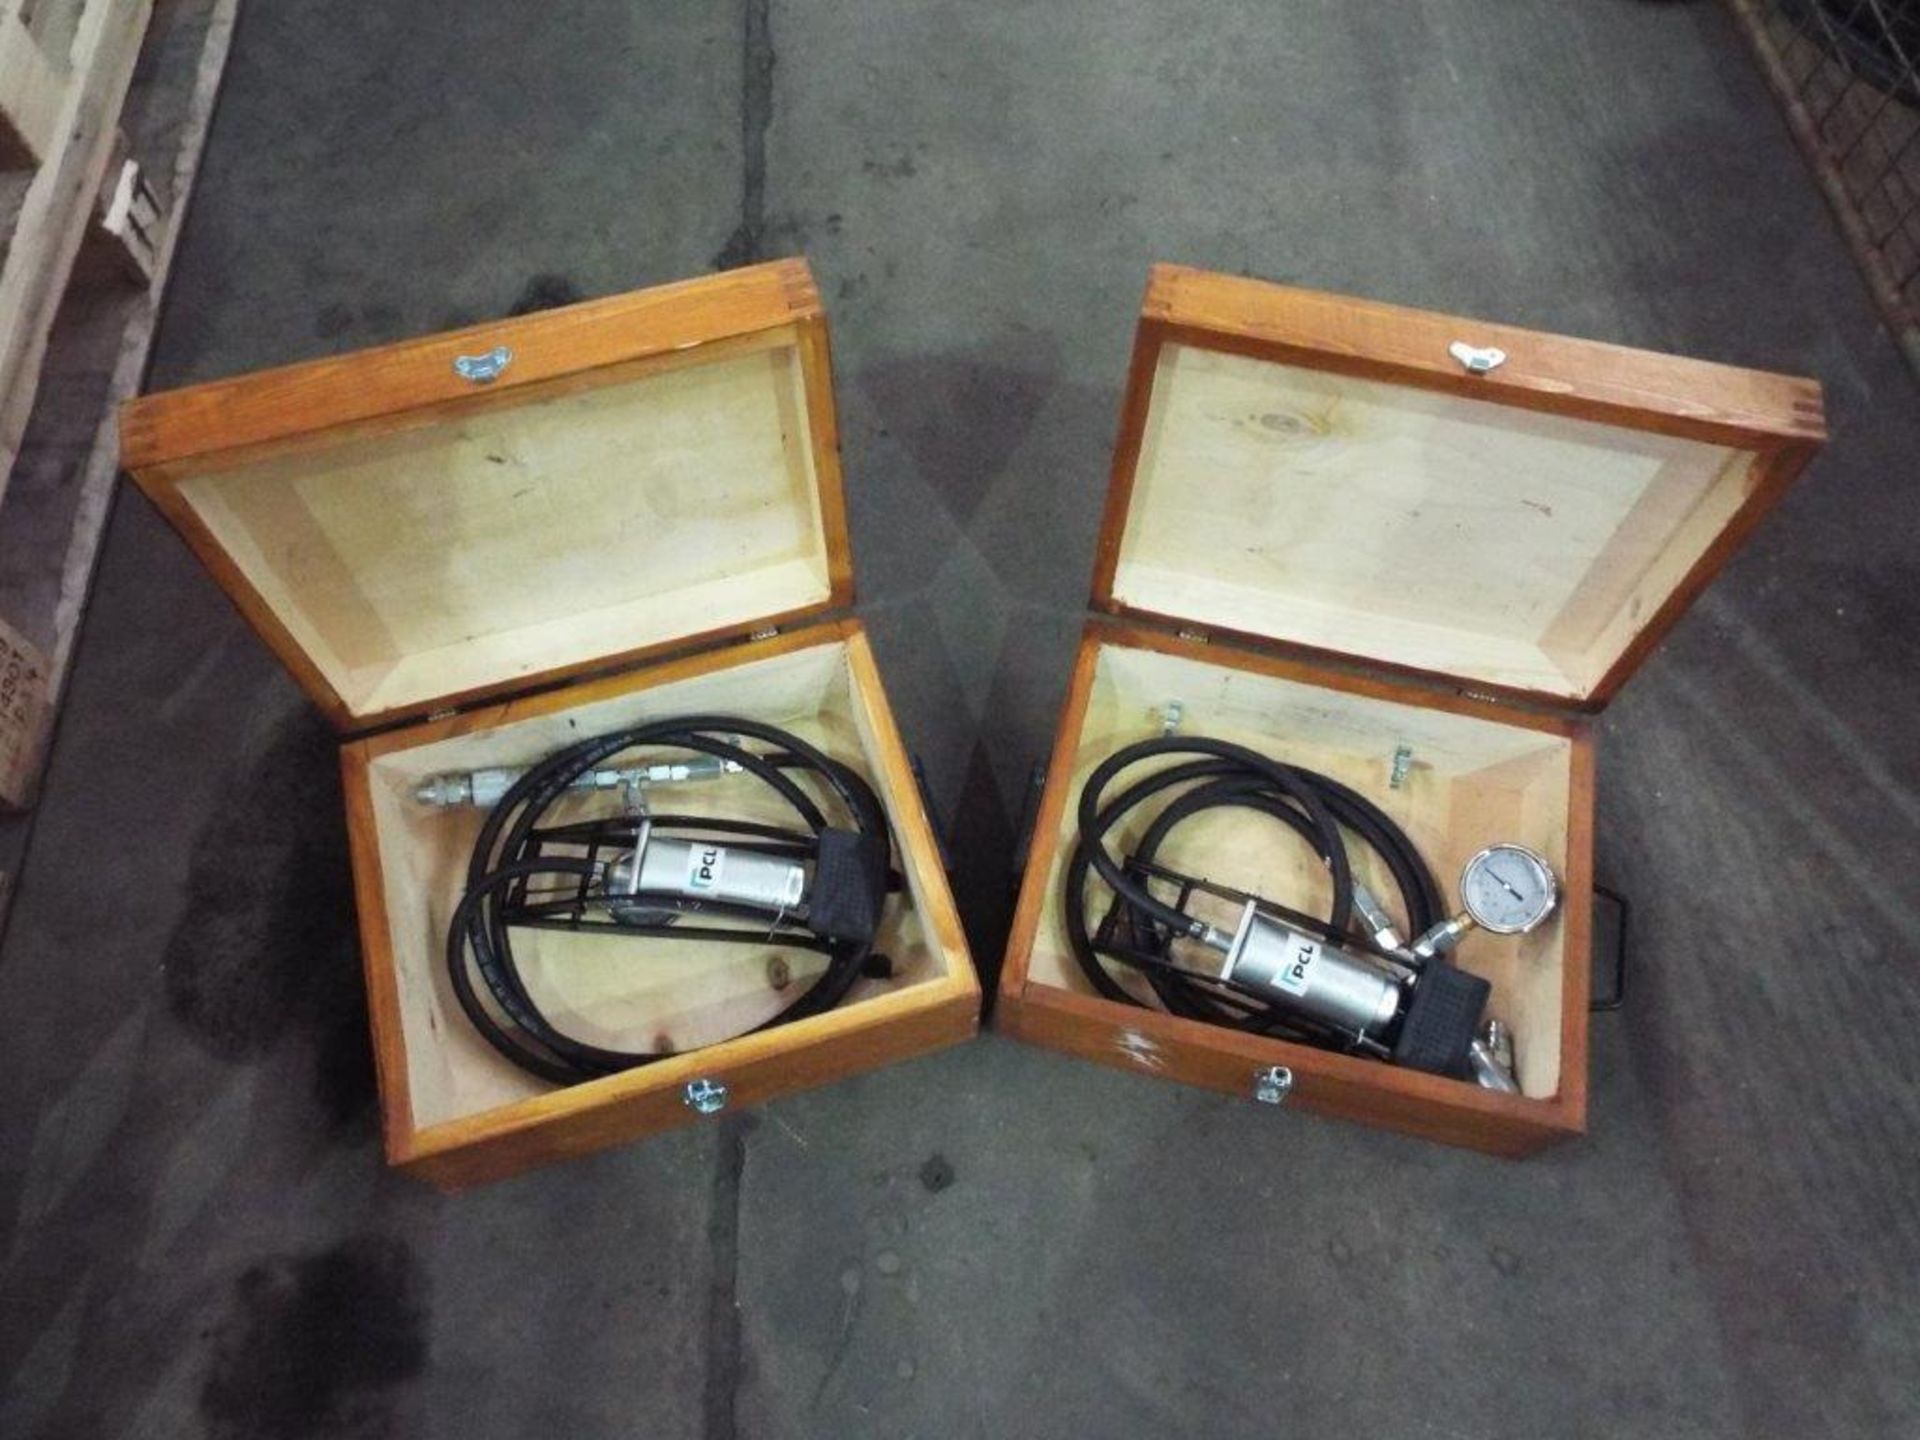 2 x PCL Pressure Test Kits in Wooden Transit Cases